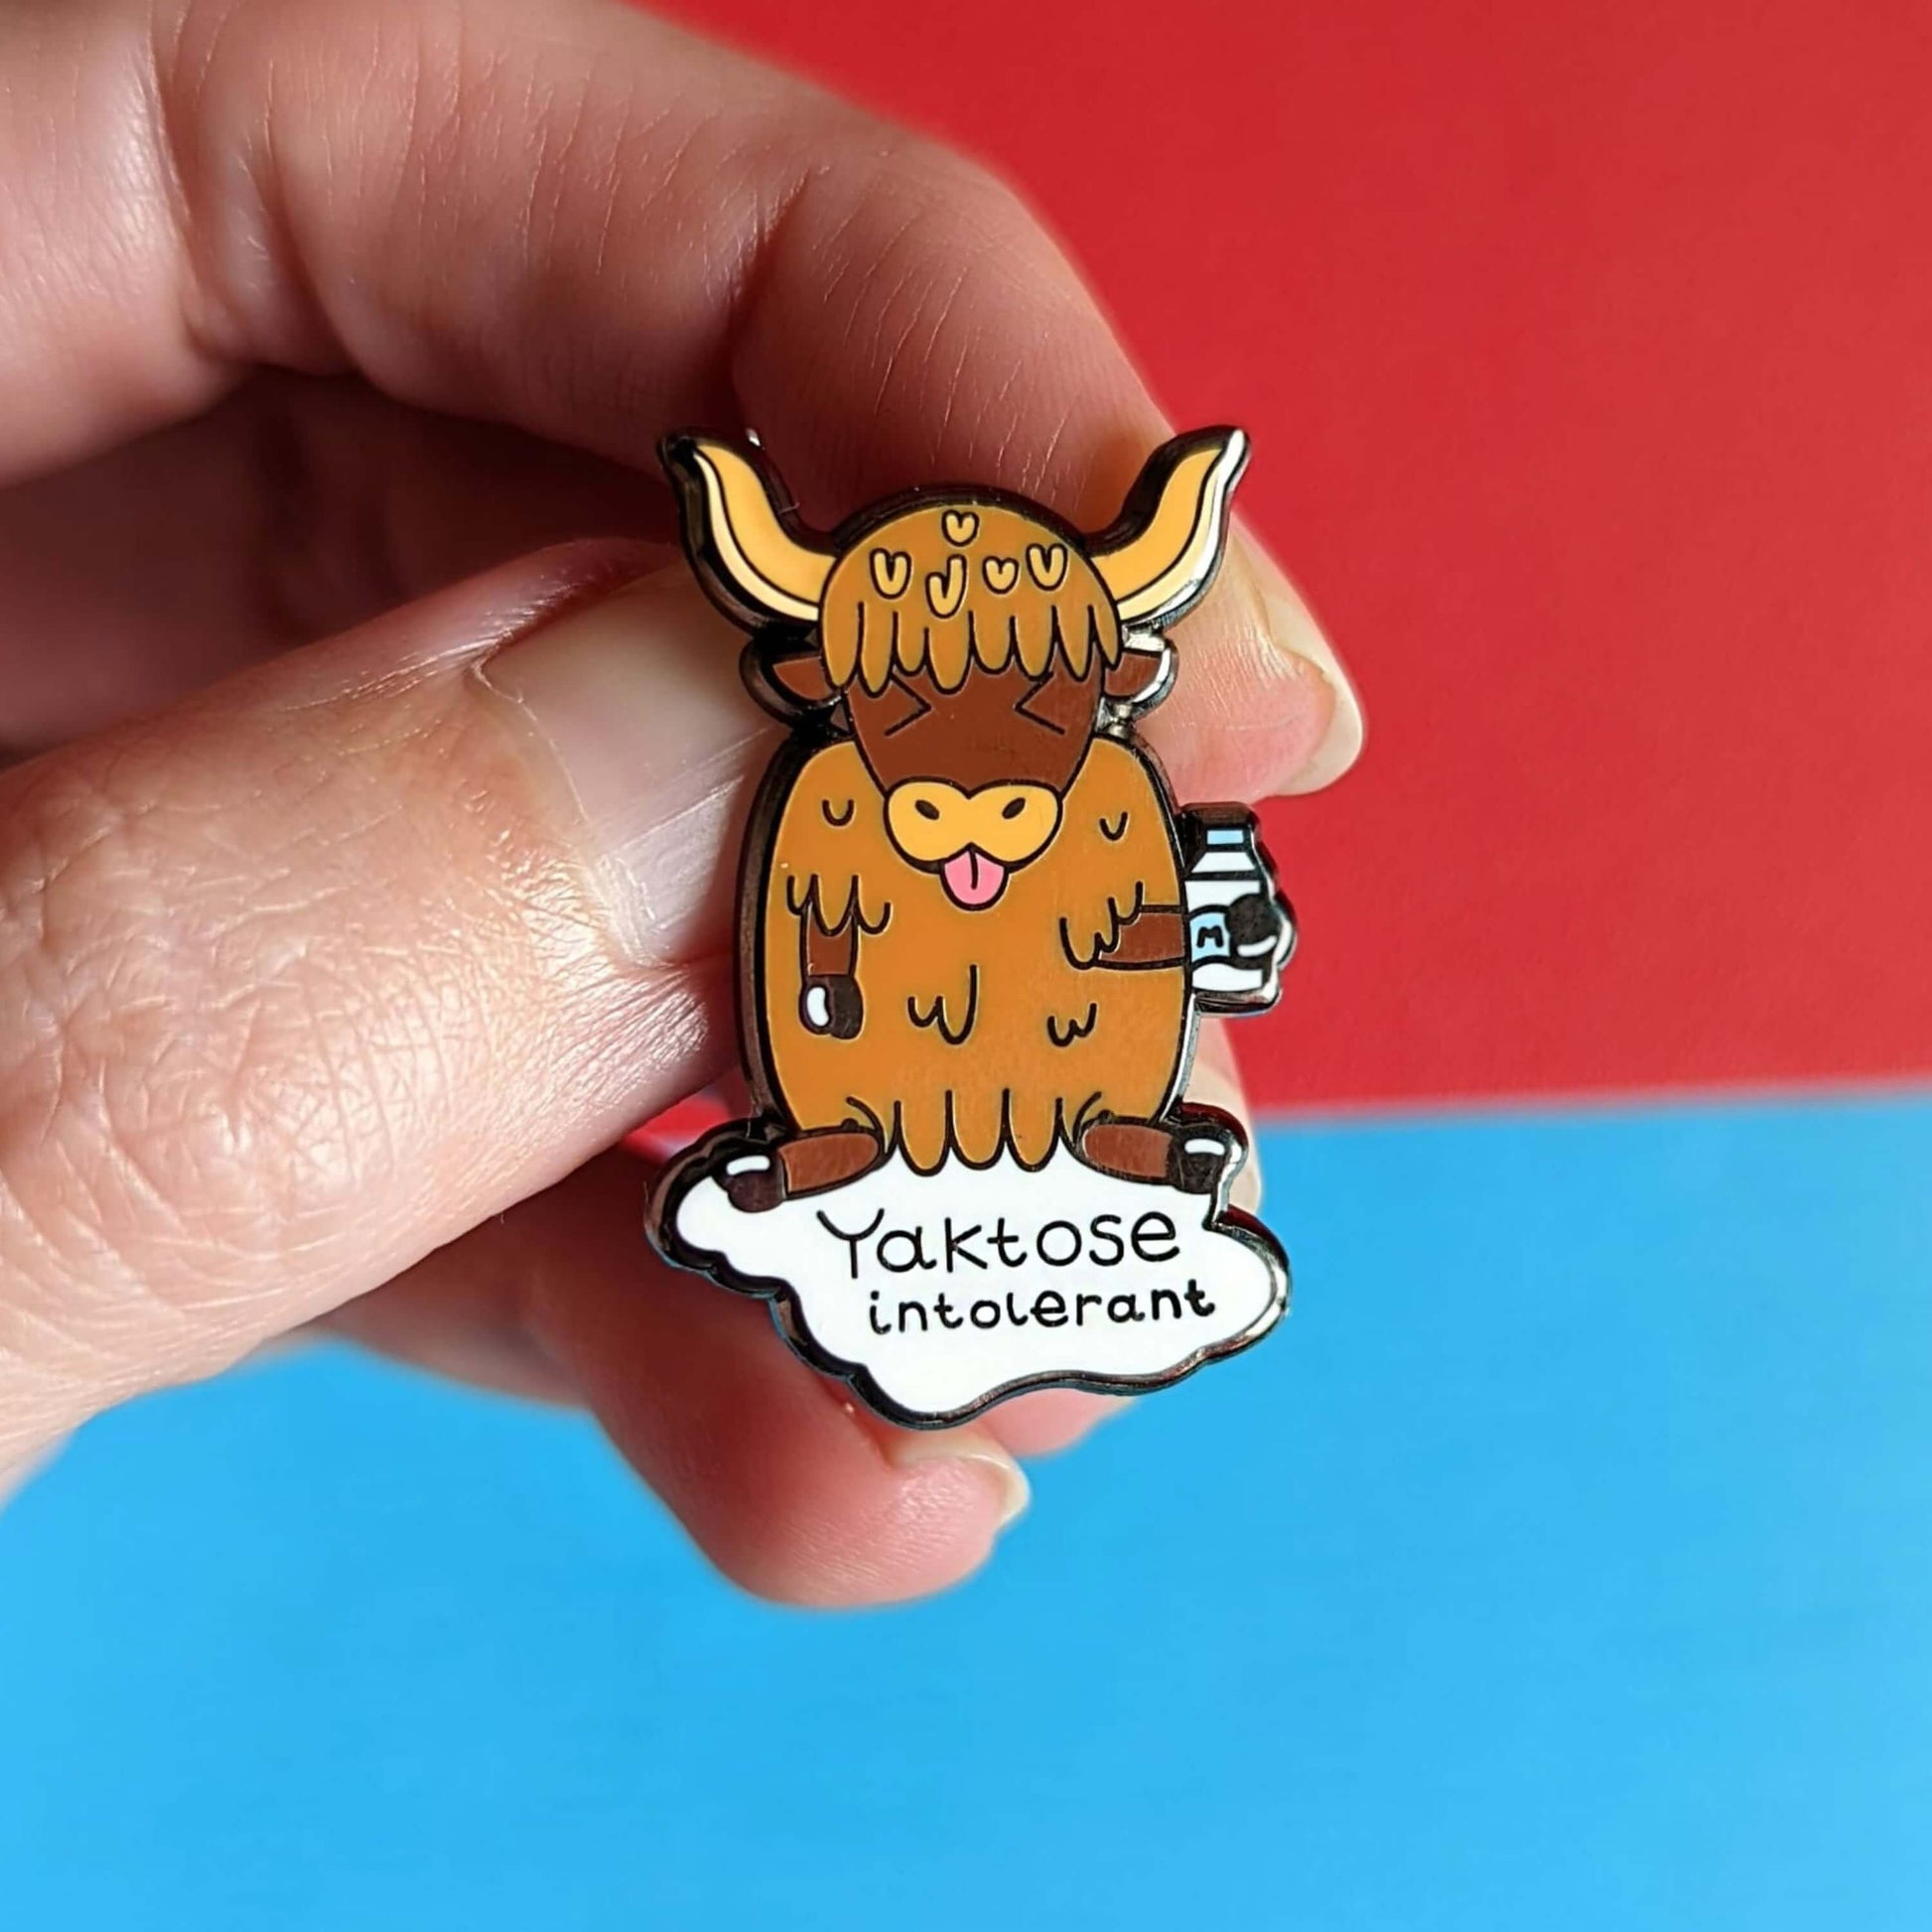 Yaktose Intolerant Enamel Pin - Lactose Intolerant held in front of a blue and red background. The enamel pin is a yak sat holding a bottle of milk with it's tongue out looking disgusted. There is a puddle of milk under the yak with black text that reads 'yaktose intolerant'. The hand drawn design is made to raise awareness for lactose intolerance